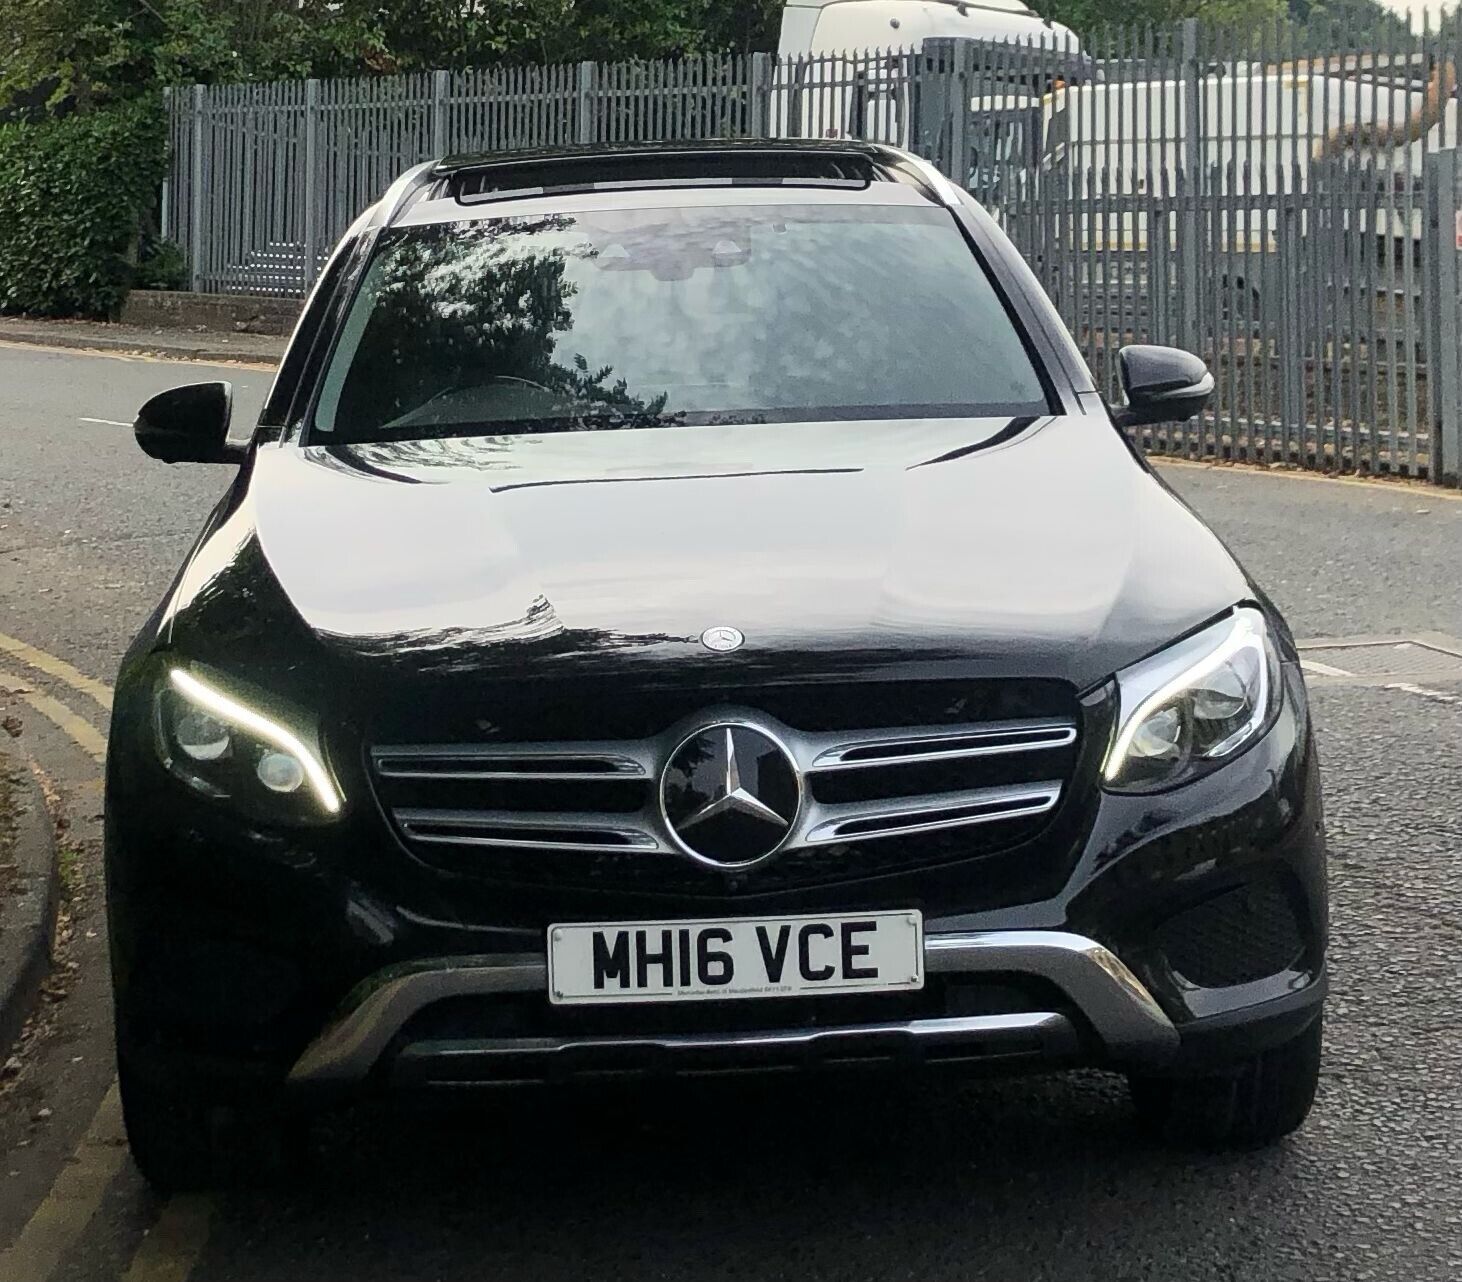 Bid on 2 KEYS ** 2016 MERCEDES-BENZ GLC250D 4 MATIC AMG LINE PREMIUM AUTO ULEZ EURO 6- Buy &amp; Sell on Auction with EAMA Group